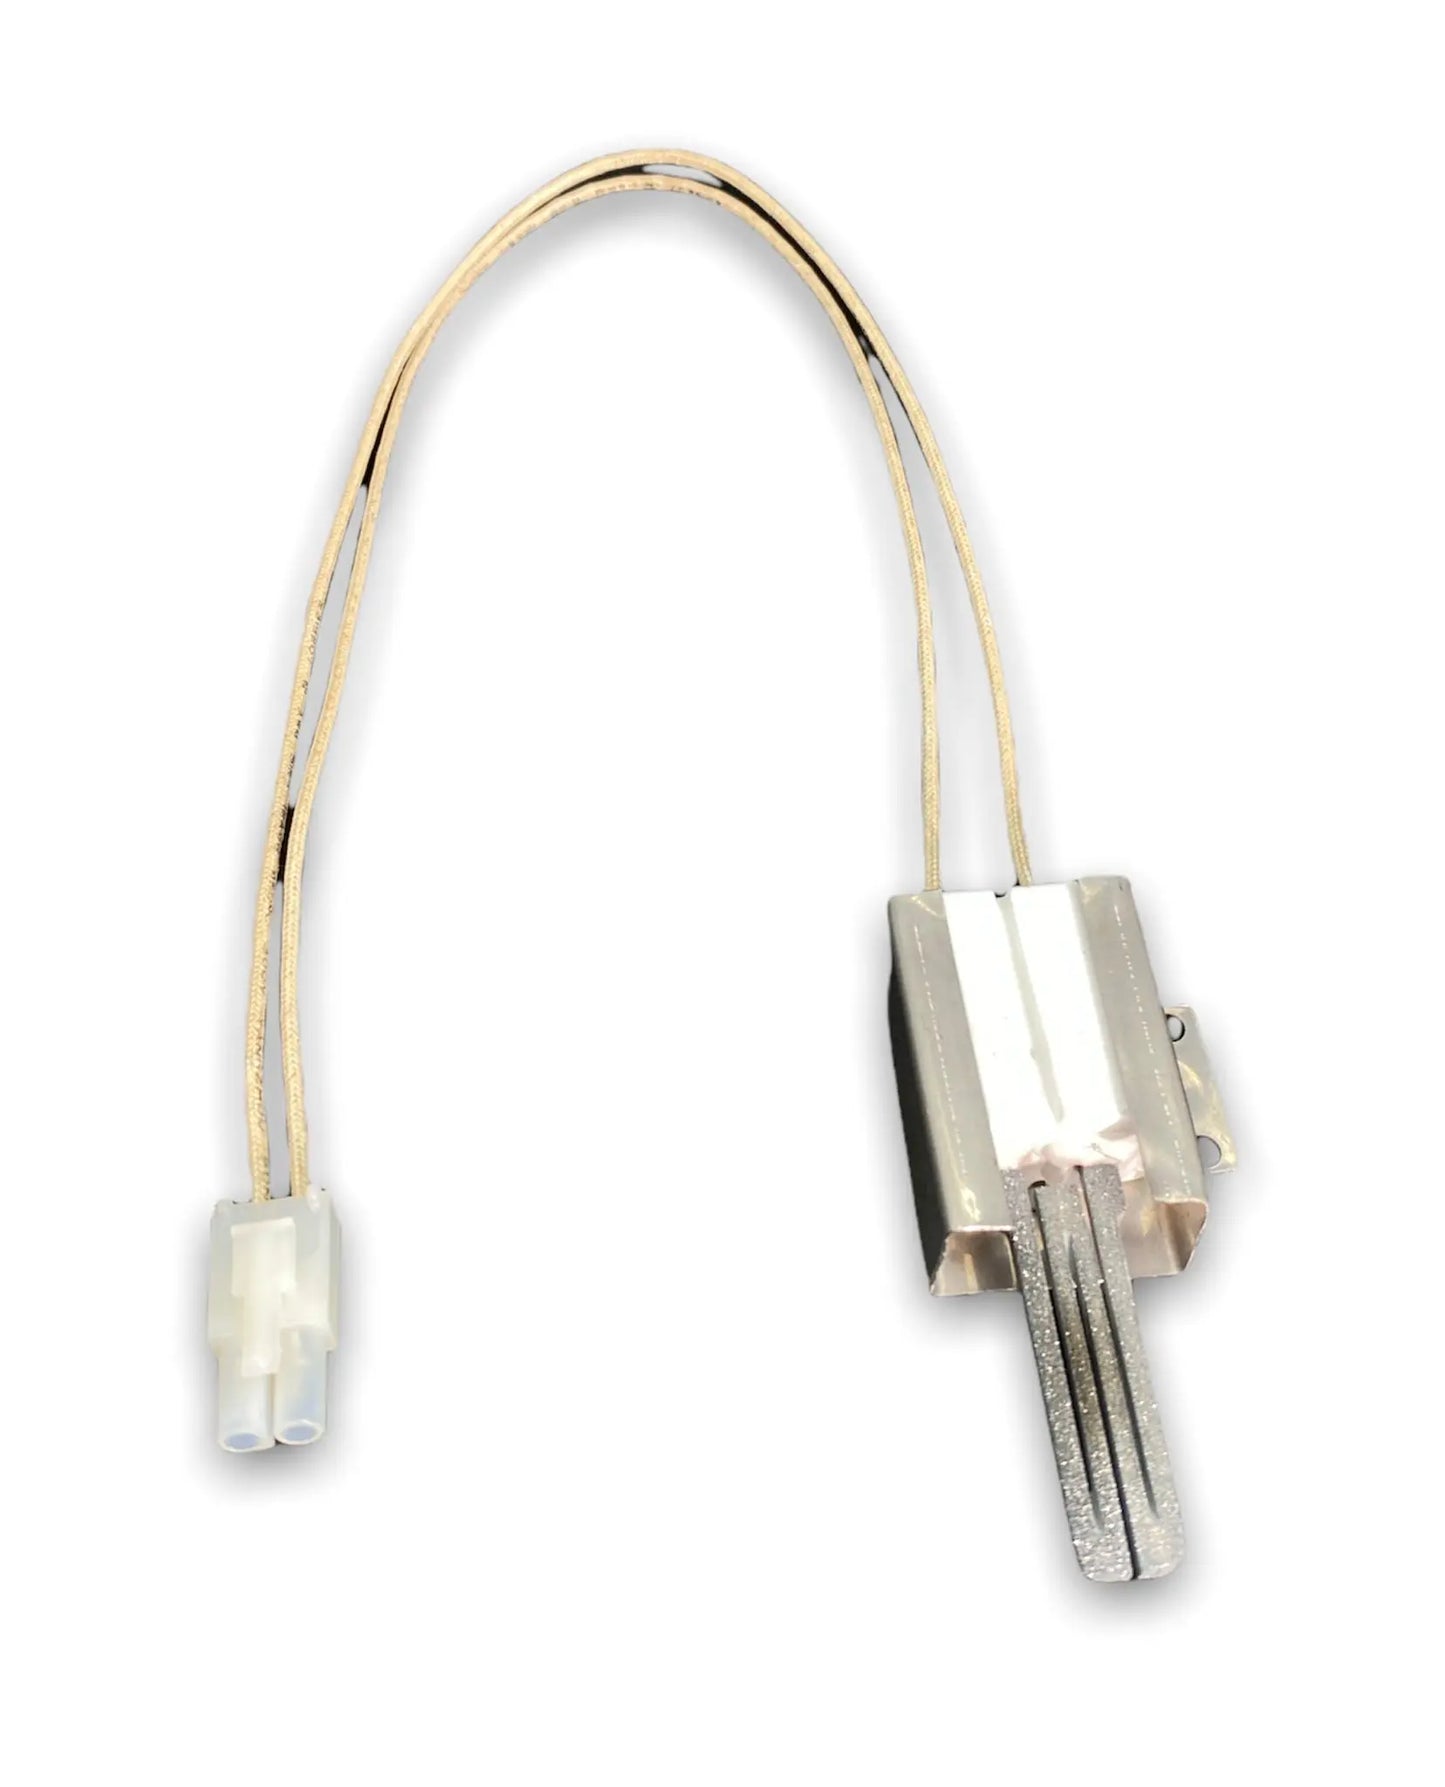 Electrolux Range Flat Gas Igniter, Hot Surface - 316489400 or 316489406, REPLACES: 1197384 PD00000633 PD00041765 316428500 316428501 5304462661  PS1528534 1615396 AP4557874  PS2581803 EAP2581803 INVERTEC